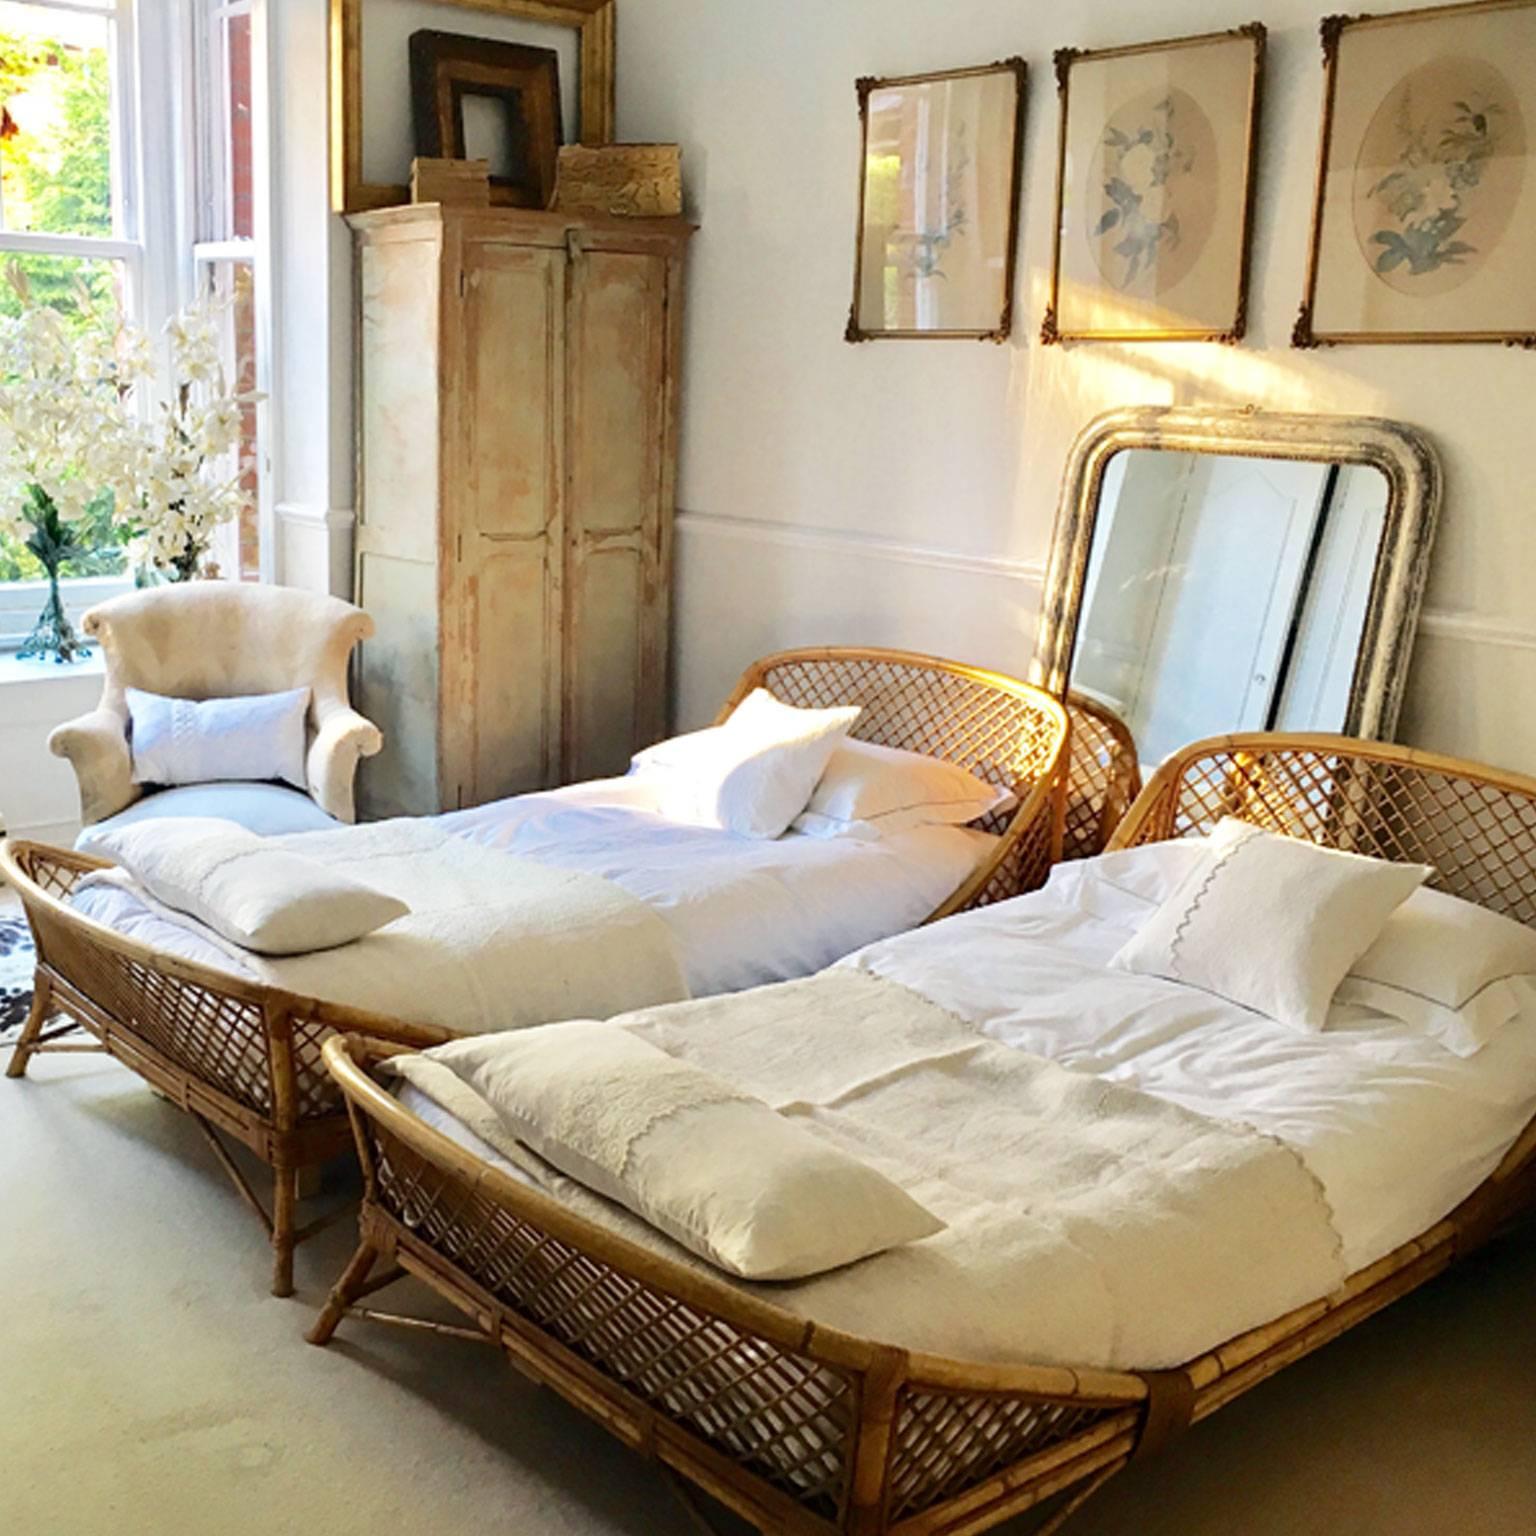 This pair of single rattan beds by Louis Sognot is superb. The clean, rounded lines, the scale and the colour all make them super stylish. In addition these beds are what we would describe as 'proper' modern size singles, so feel roomy and